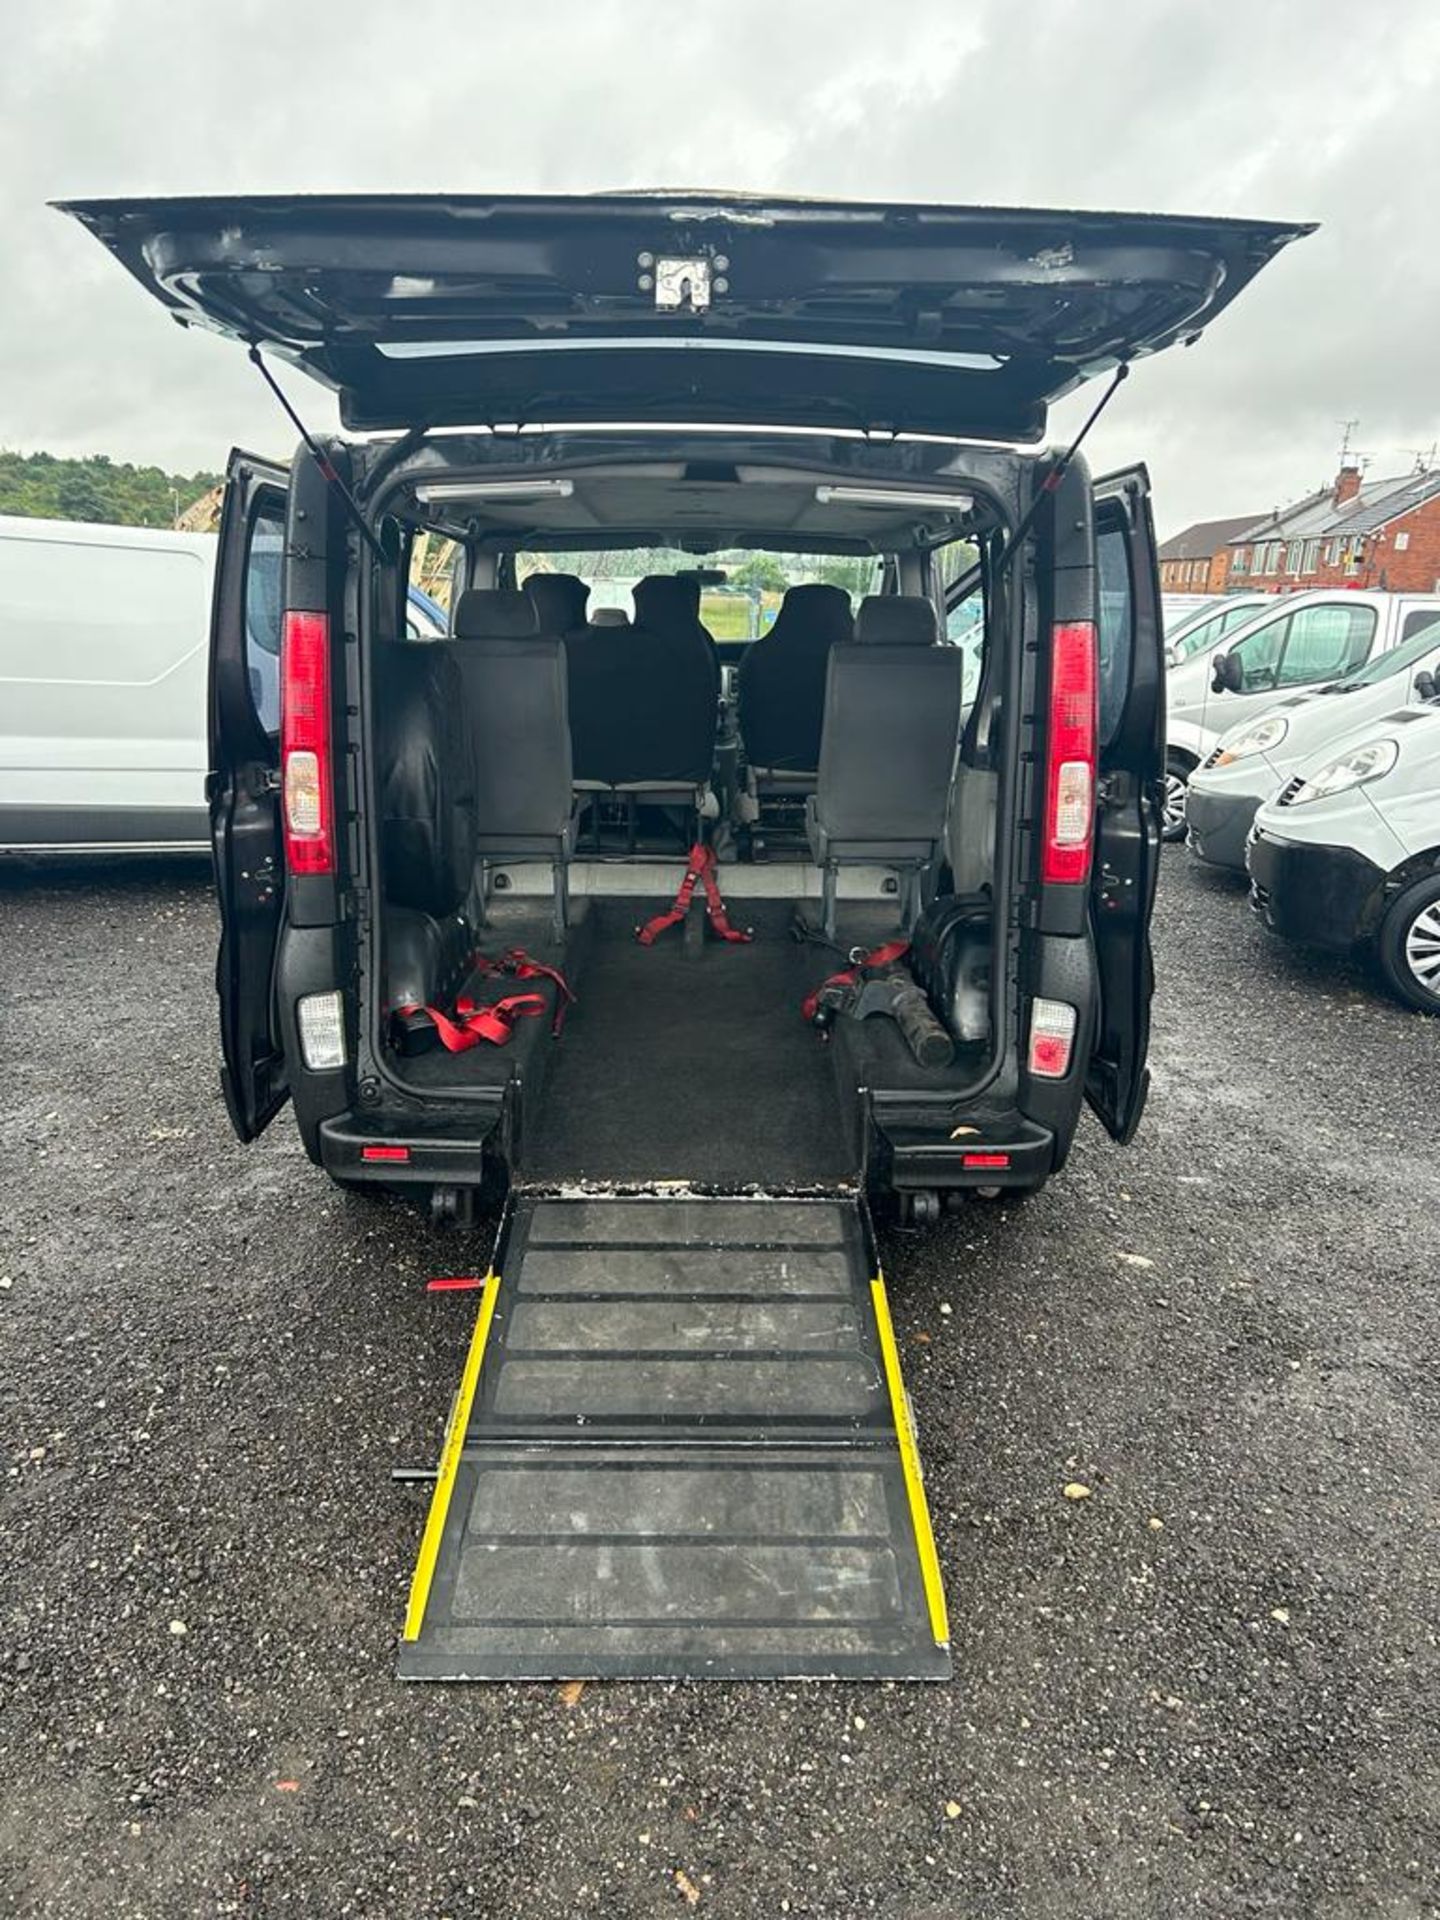 2010 RENAULT TRAFIC SL27 DCI 115 BLACK VAN DERIVED CAR WITH MOBILITY WHEELCHAIR ACCESS *NO VAT* - Image 8 of 18